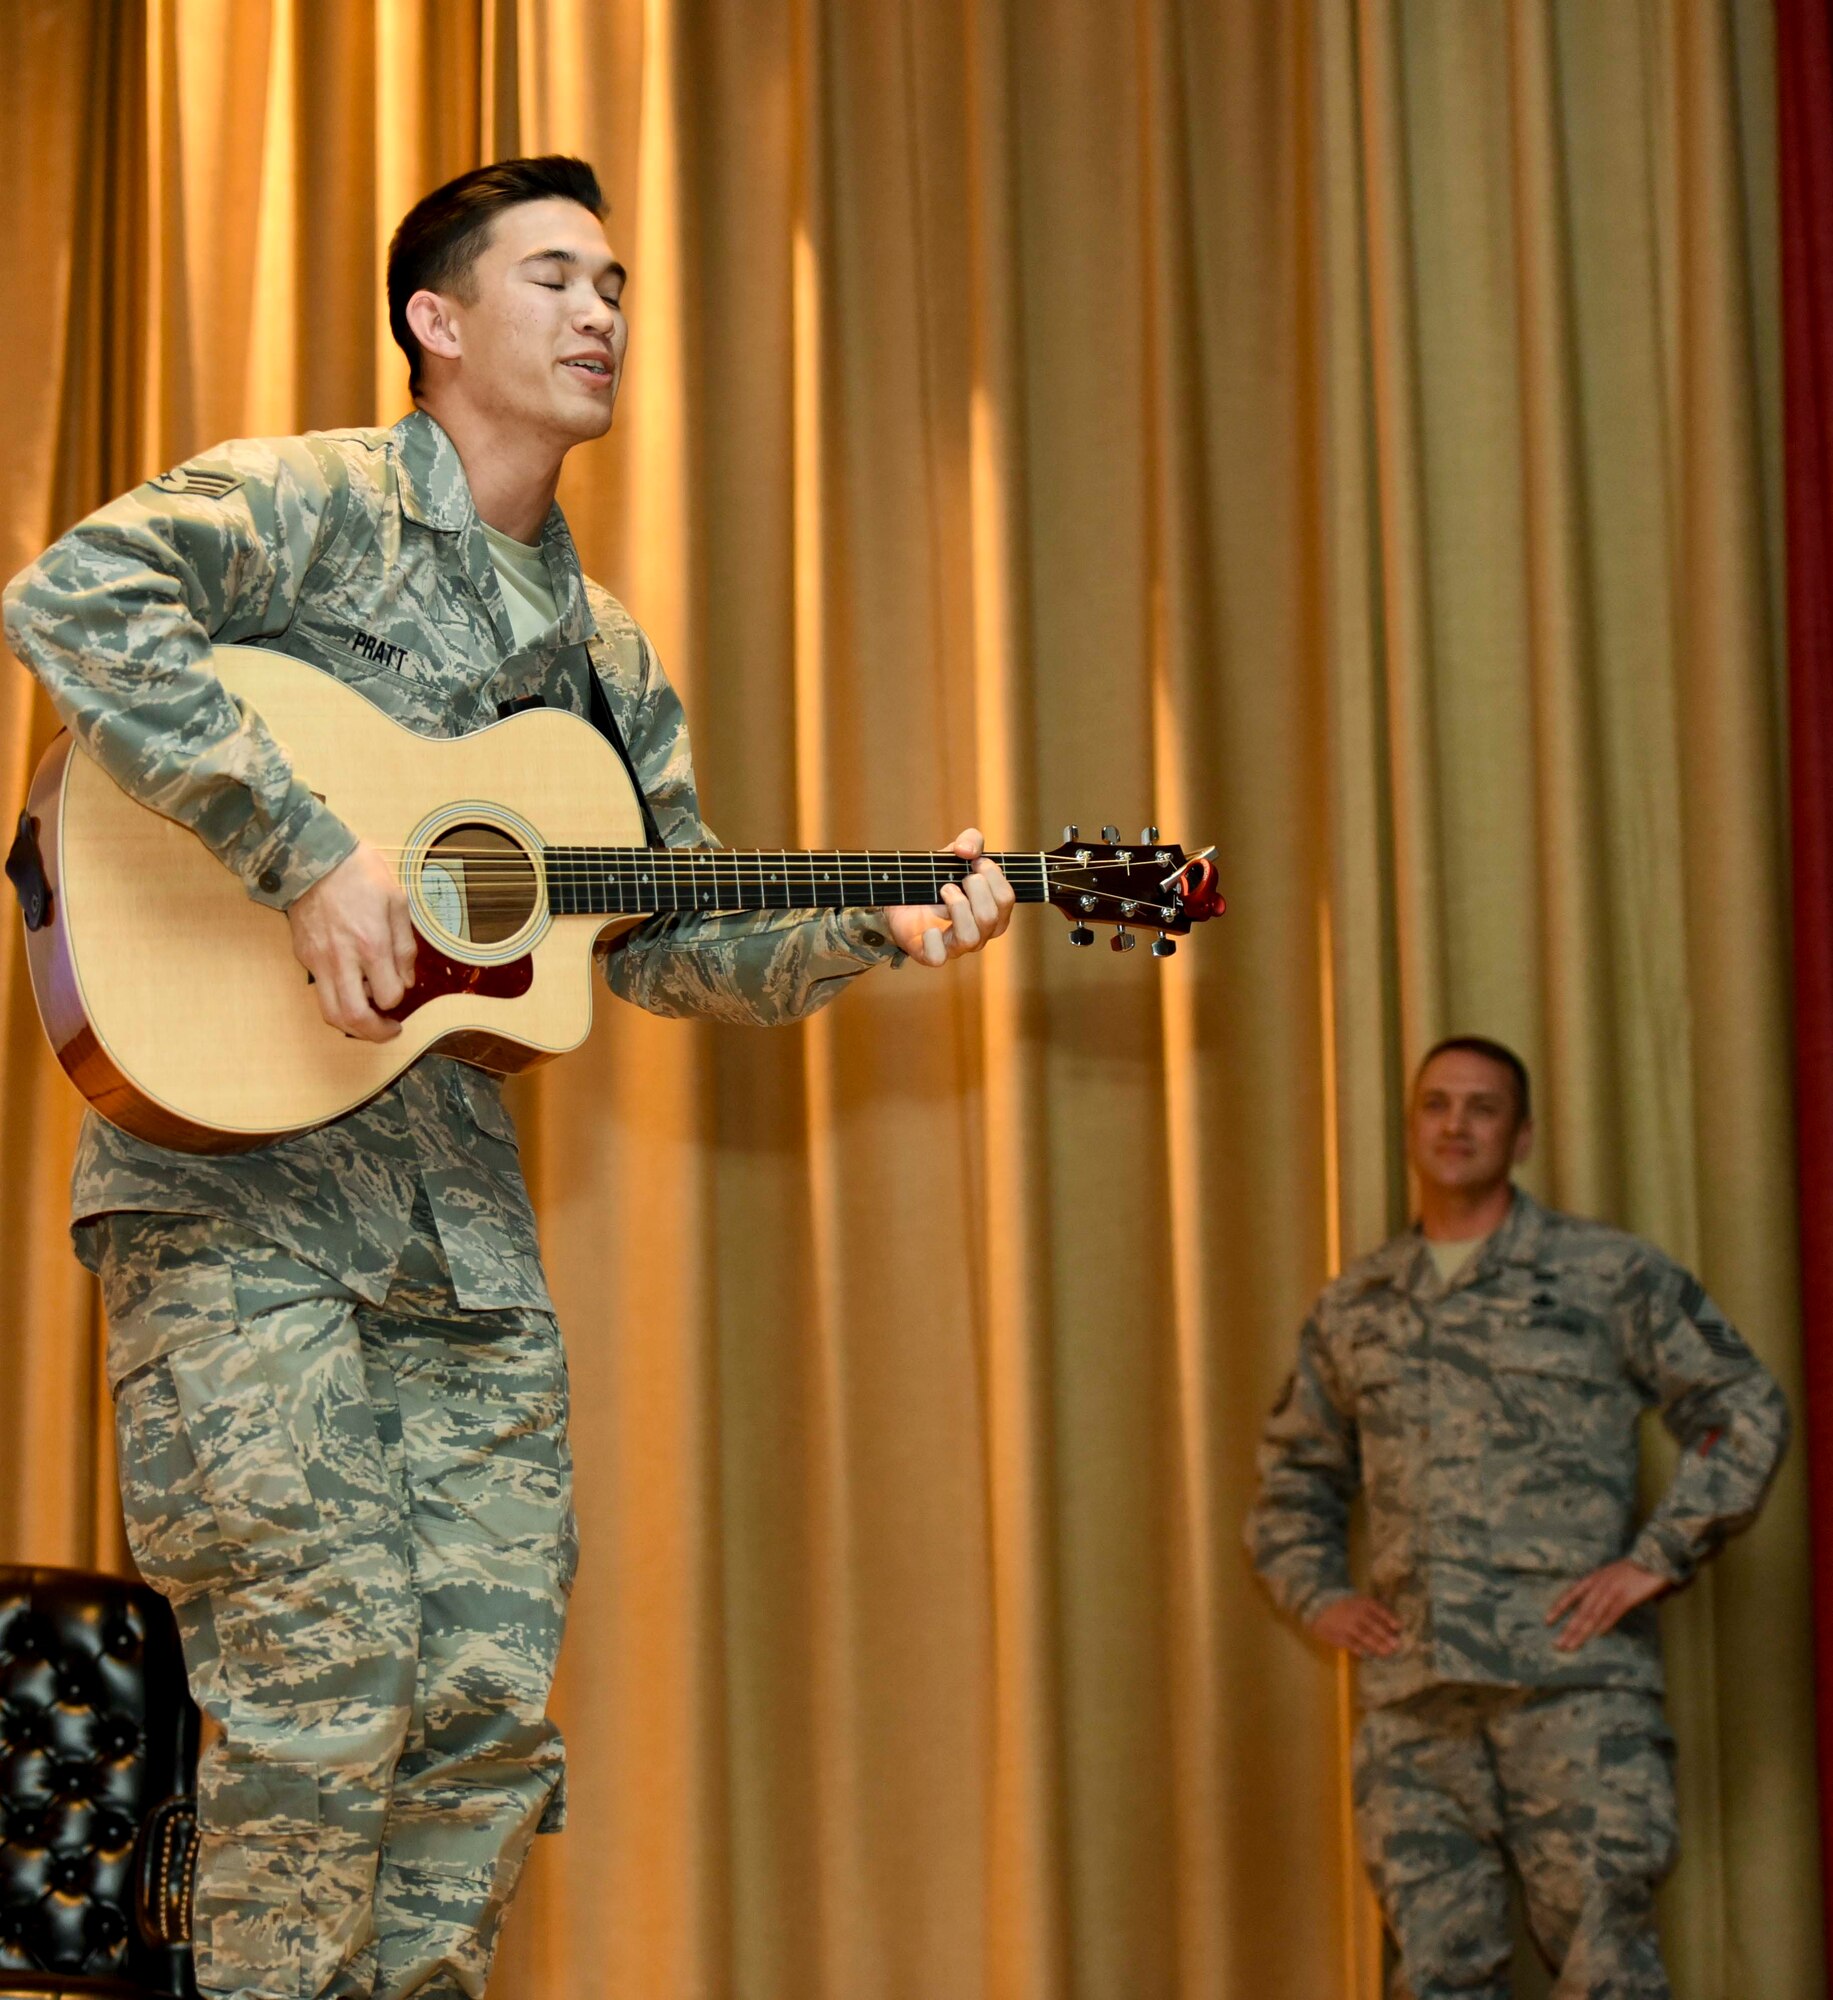 Senior Airman James Pratt, a heavy equipment operator assigned to the 28th Civil Engineer Squadron, performs John Mayer’s “Age of Worry” in front of the 28th Mission Support Group inside the base theater during their annual awards ceremony, Jan. 26, 2017, at Ellsworth Air Force Base, S.D. Pratt applied for the Air Force Entertainer of the Year by submitting a cell-phone video of himself performing a song. On Jan. 30, he was announced as the recipient of the Air Force-wide award and coined by Col. Gentry Boswell, the commander of the 28th Bomb Wing.  (U.S. Air Force photo by Airman 1st Class Randahl J. Jenson)